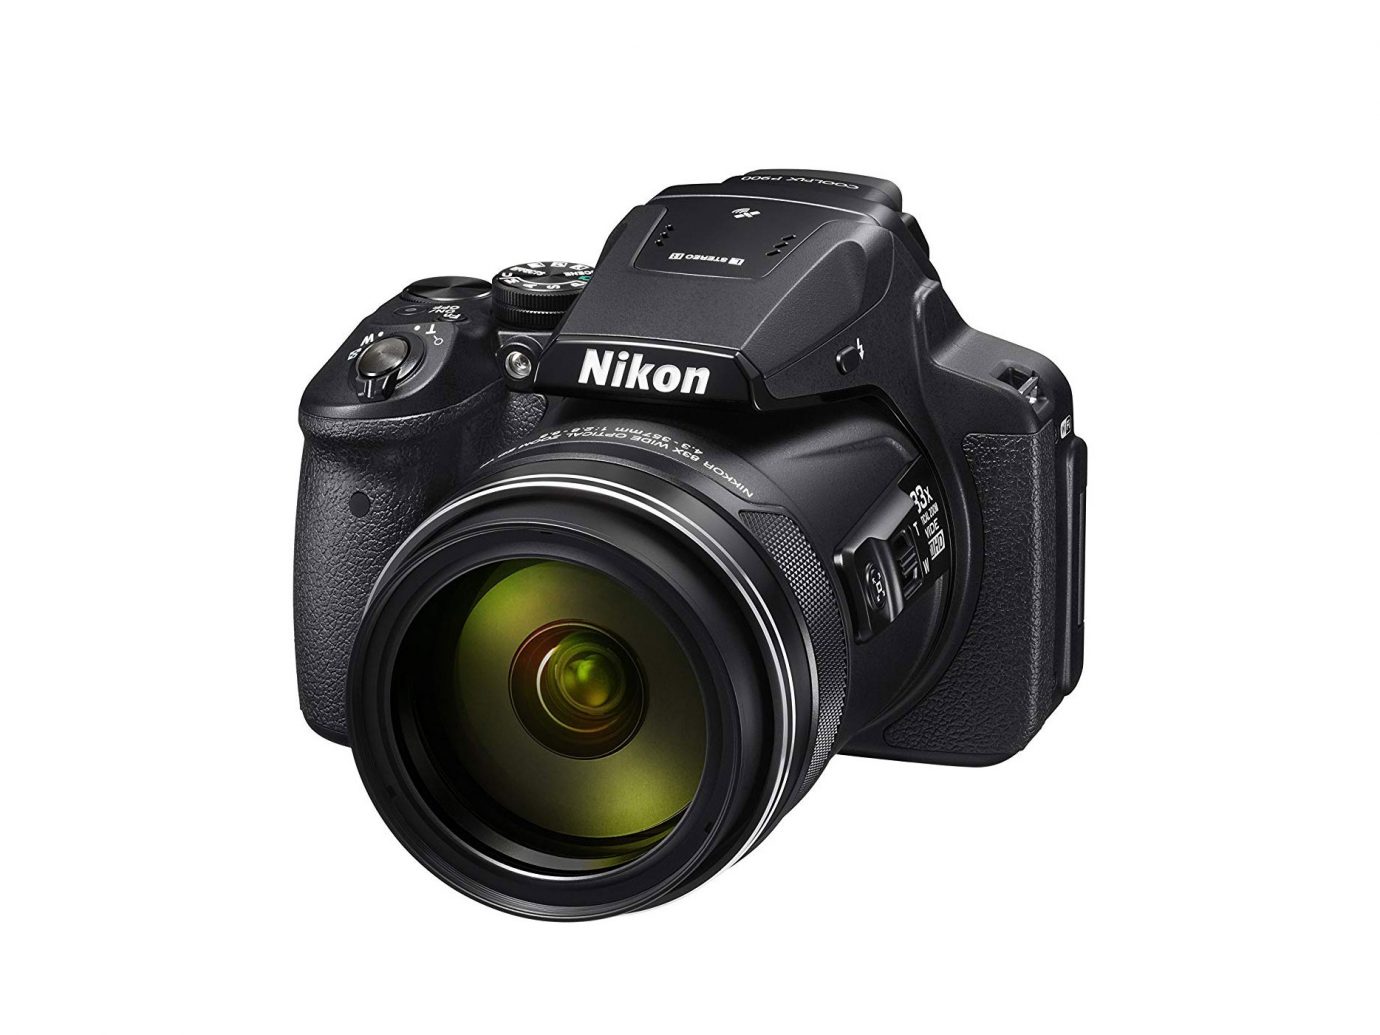 Nikon COOLPIX P900 Digital Camera with 83x Optical Zoom and Built-In Wi-Fi(